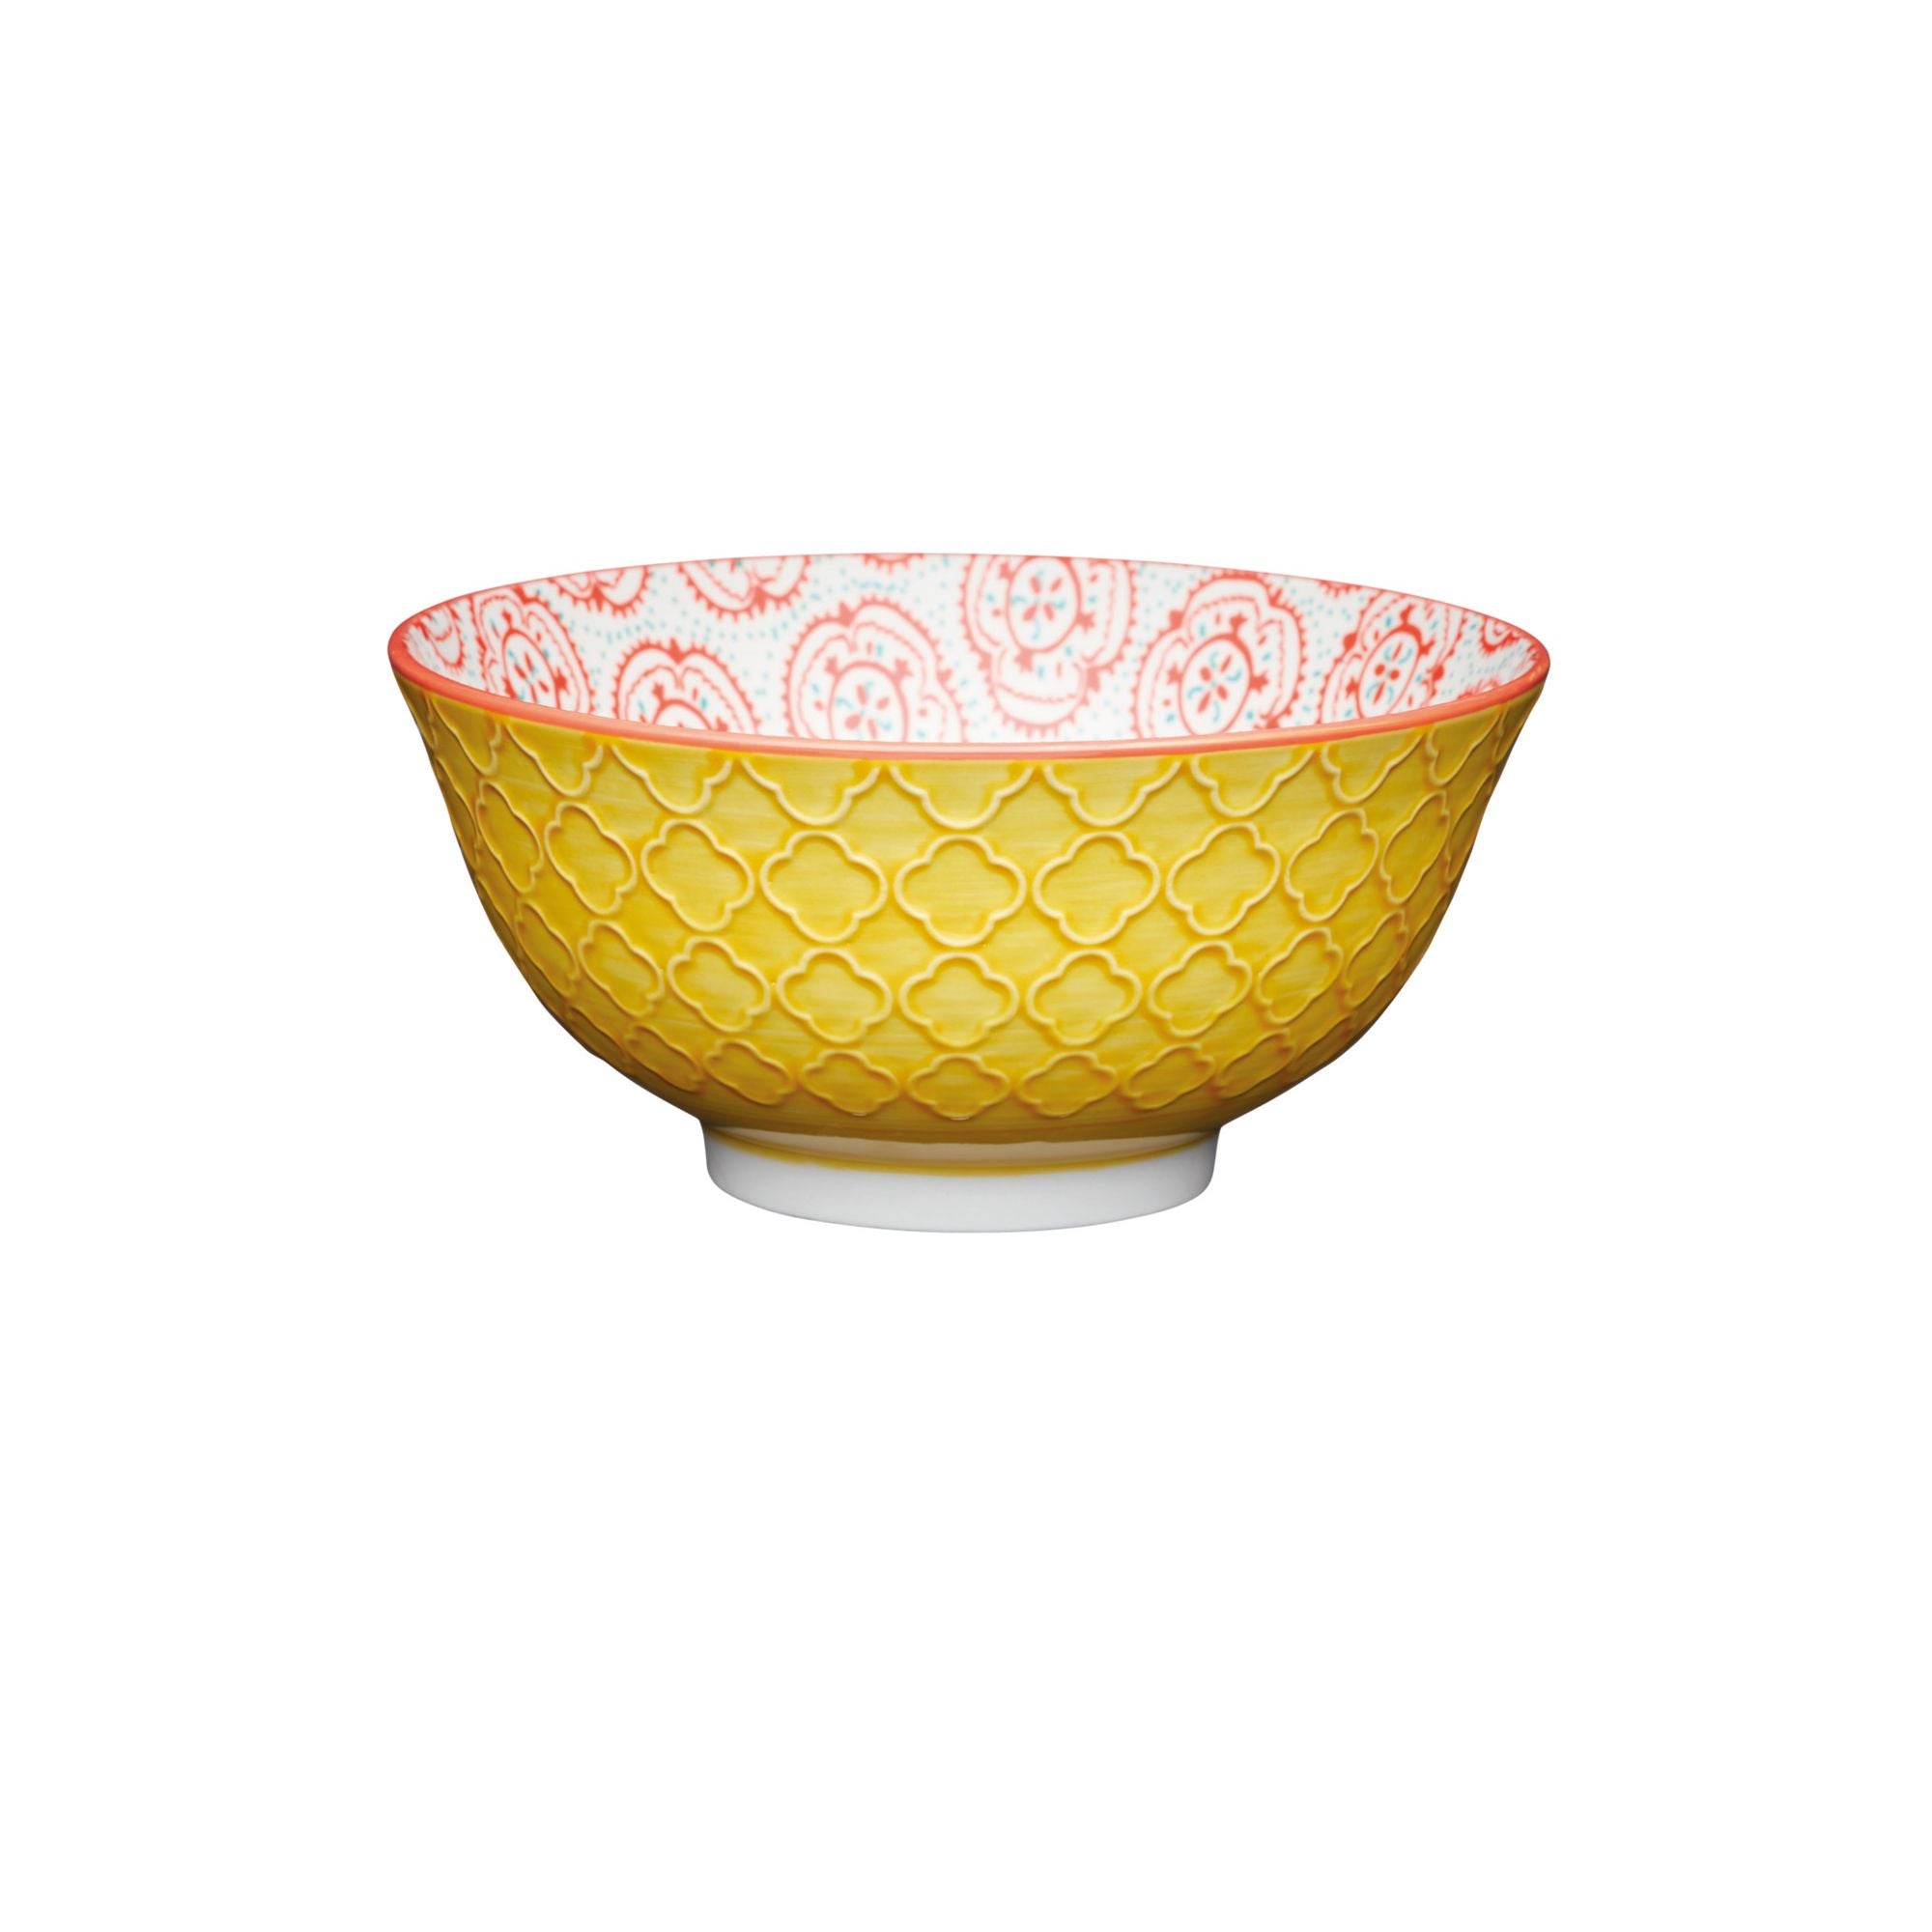 Mikasa Does It All Bowl - Yellow Floral 15.7cm